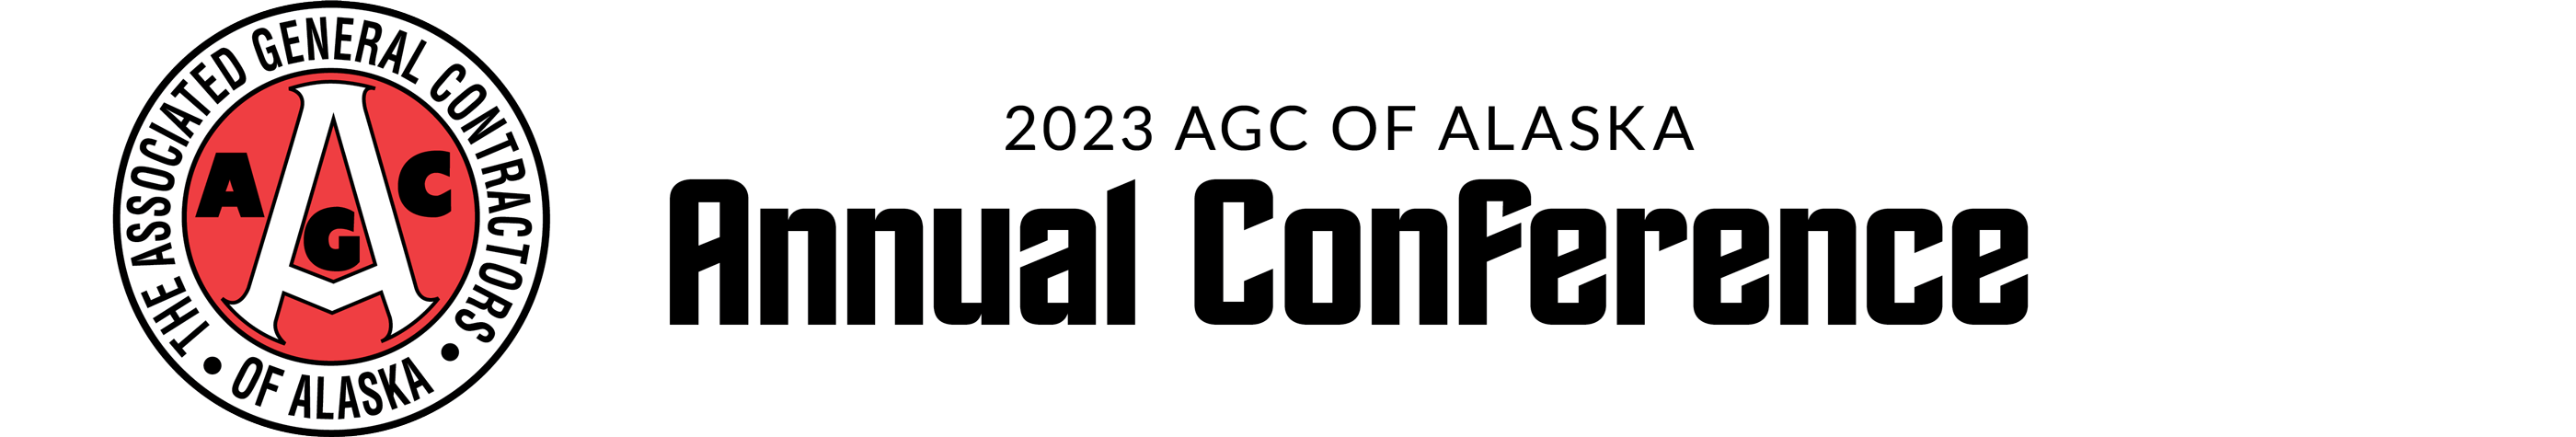 2023 AGC of Alaska Annual Conference